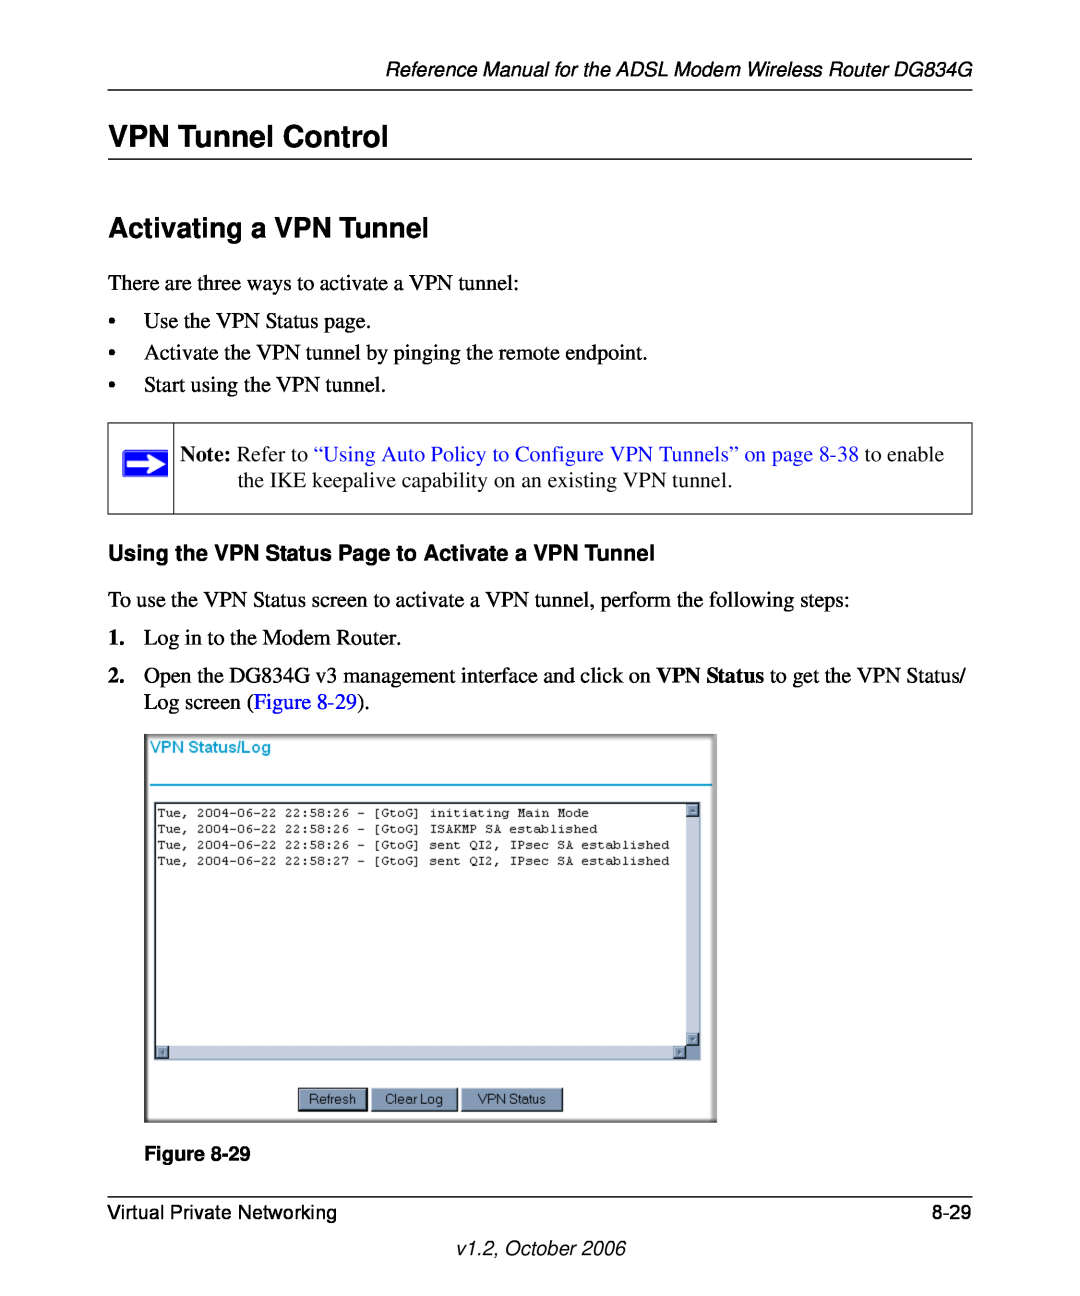 NETGEAR DG834G manual VPN Tunnel Control, Activating a VPN Tunnel, Using the VPN Status Page to Activate a VPN Tunnel 